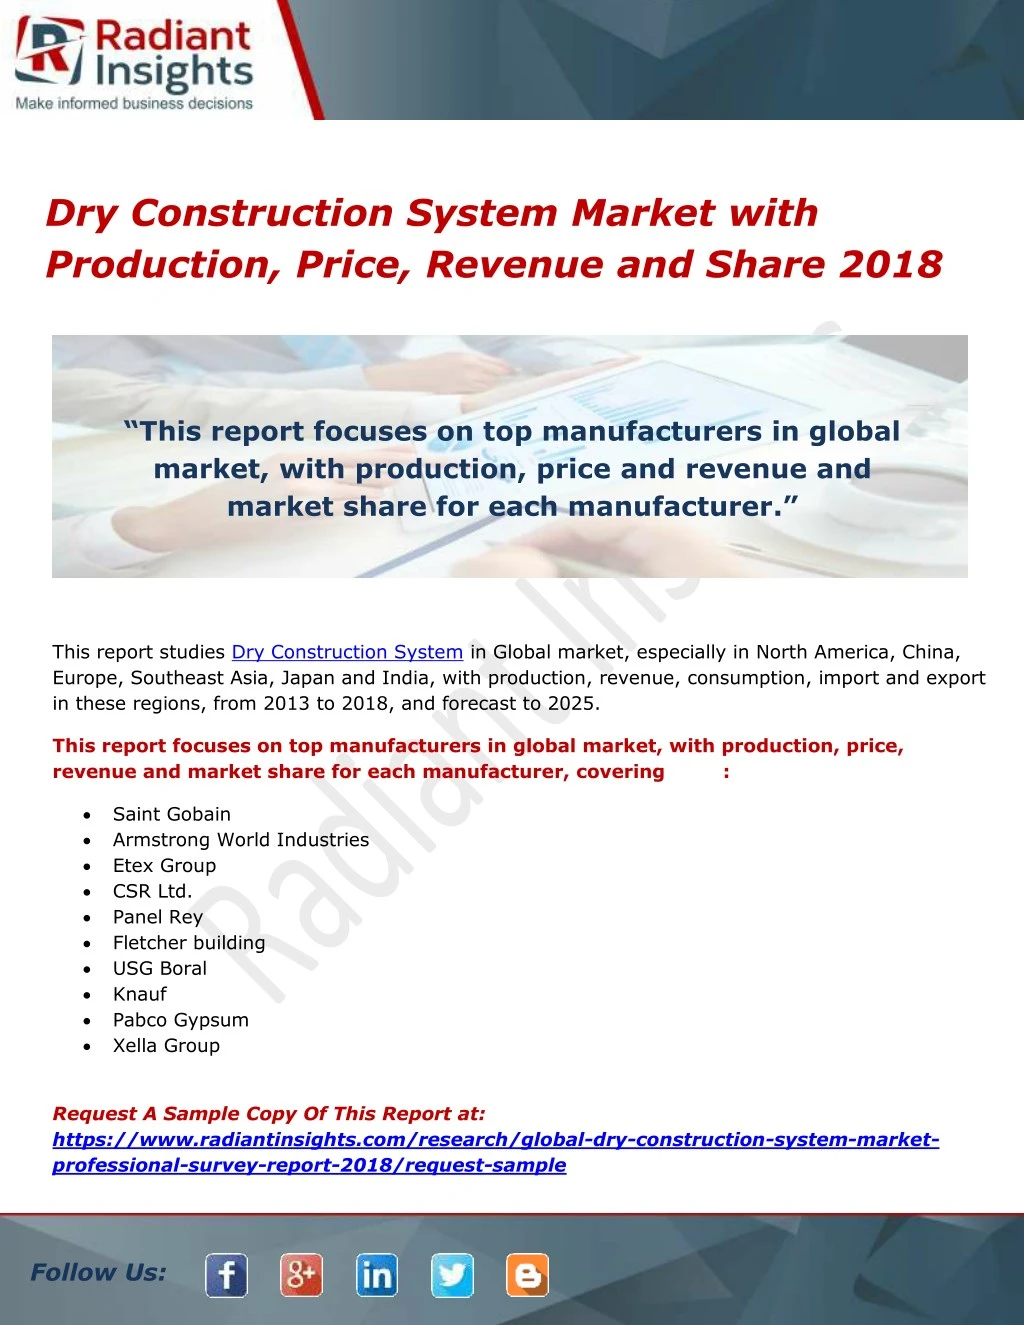 dry construction system market with production